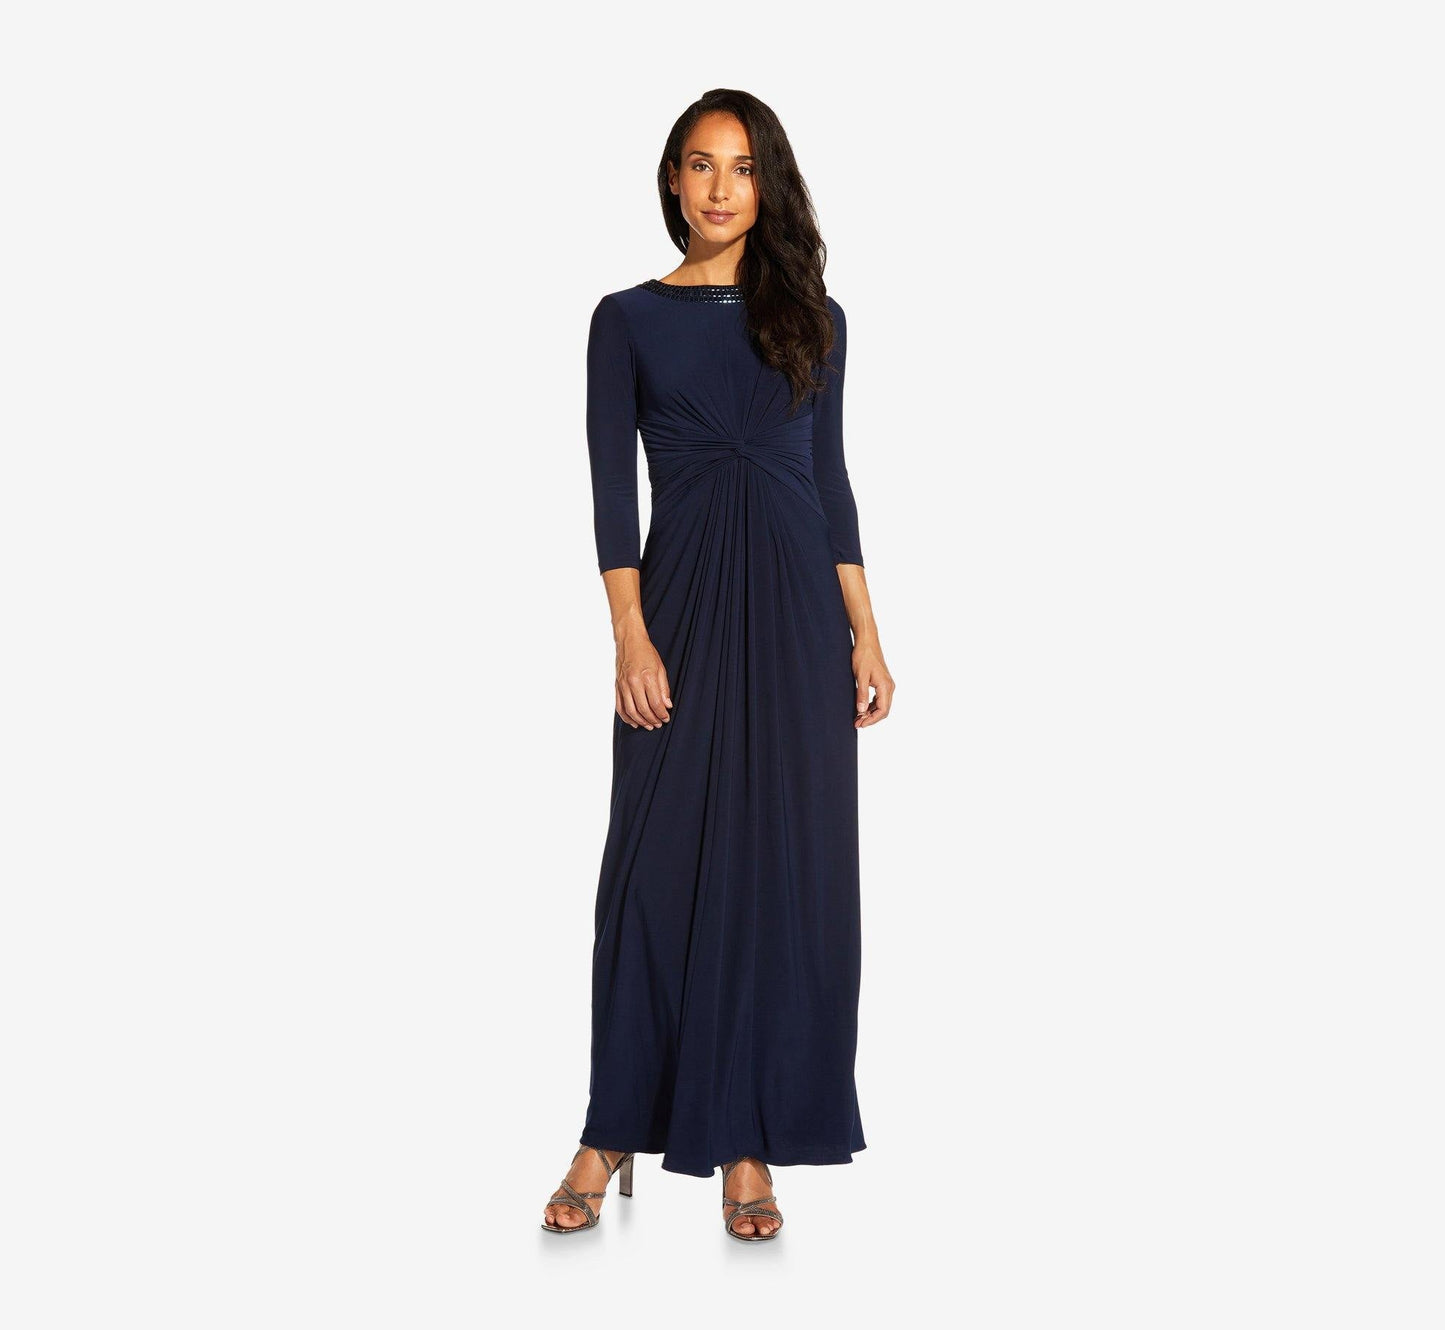 Adrianna Papell 3/4 Sleeve Long Dress AP1E207502 - The Dress Outlet